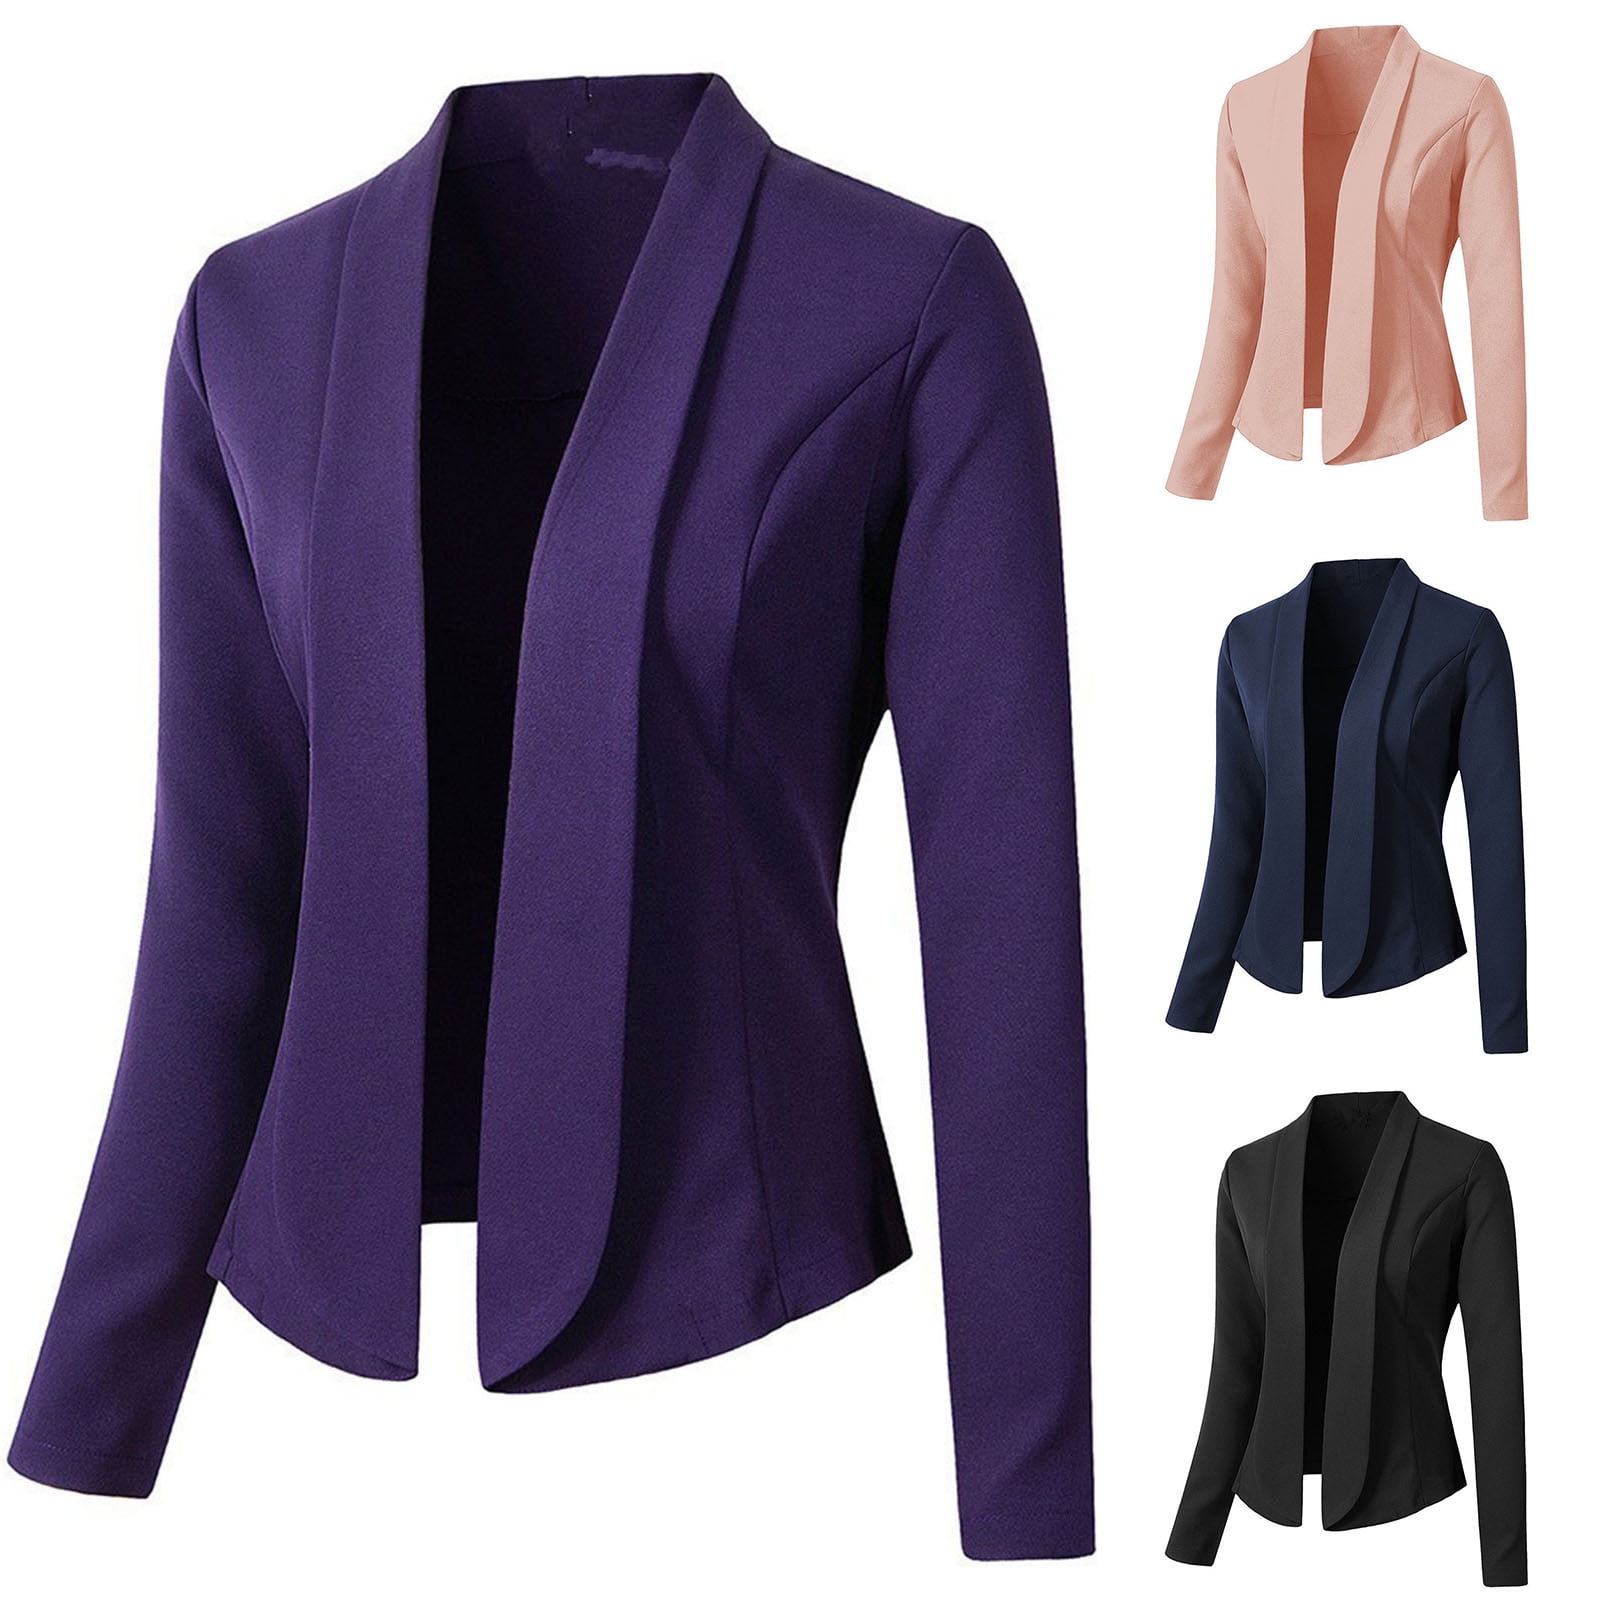 Womens Casual Work Office Blazer Open Front Long Sleeve Suits Jackets ...